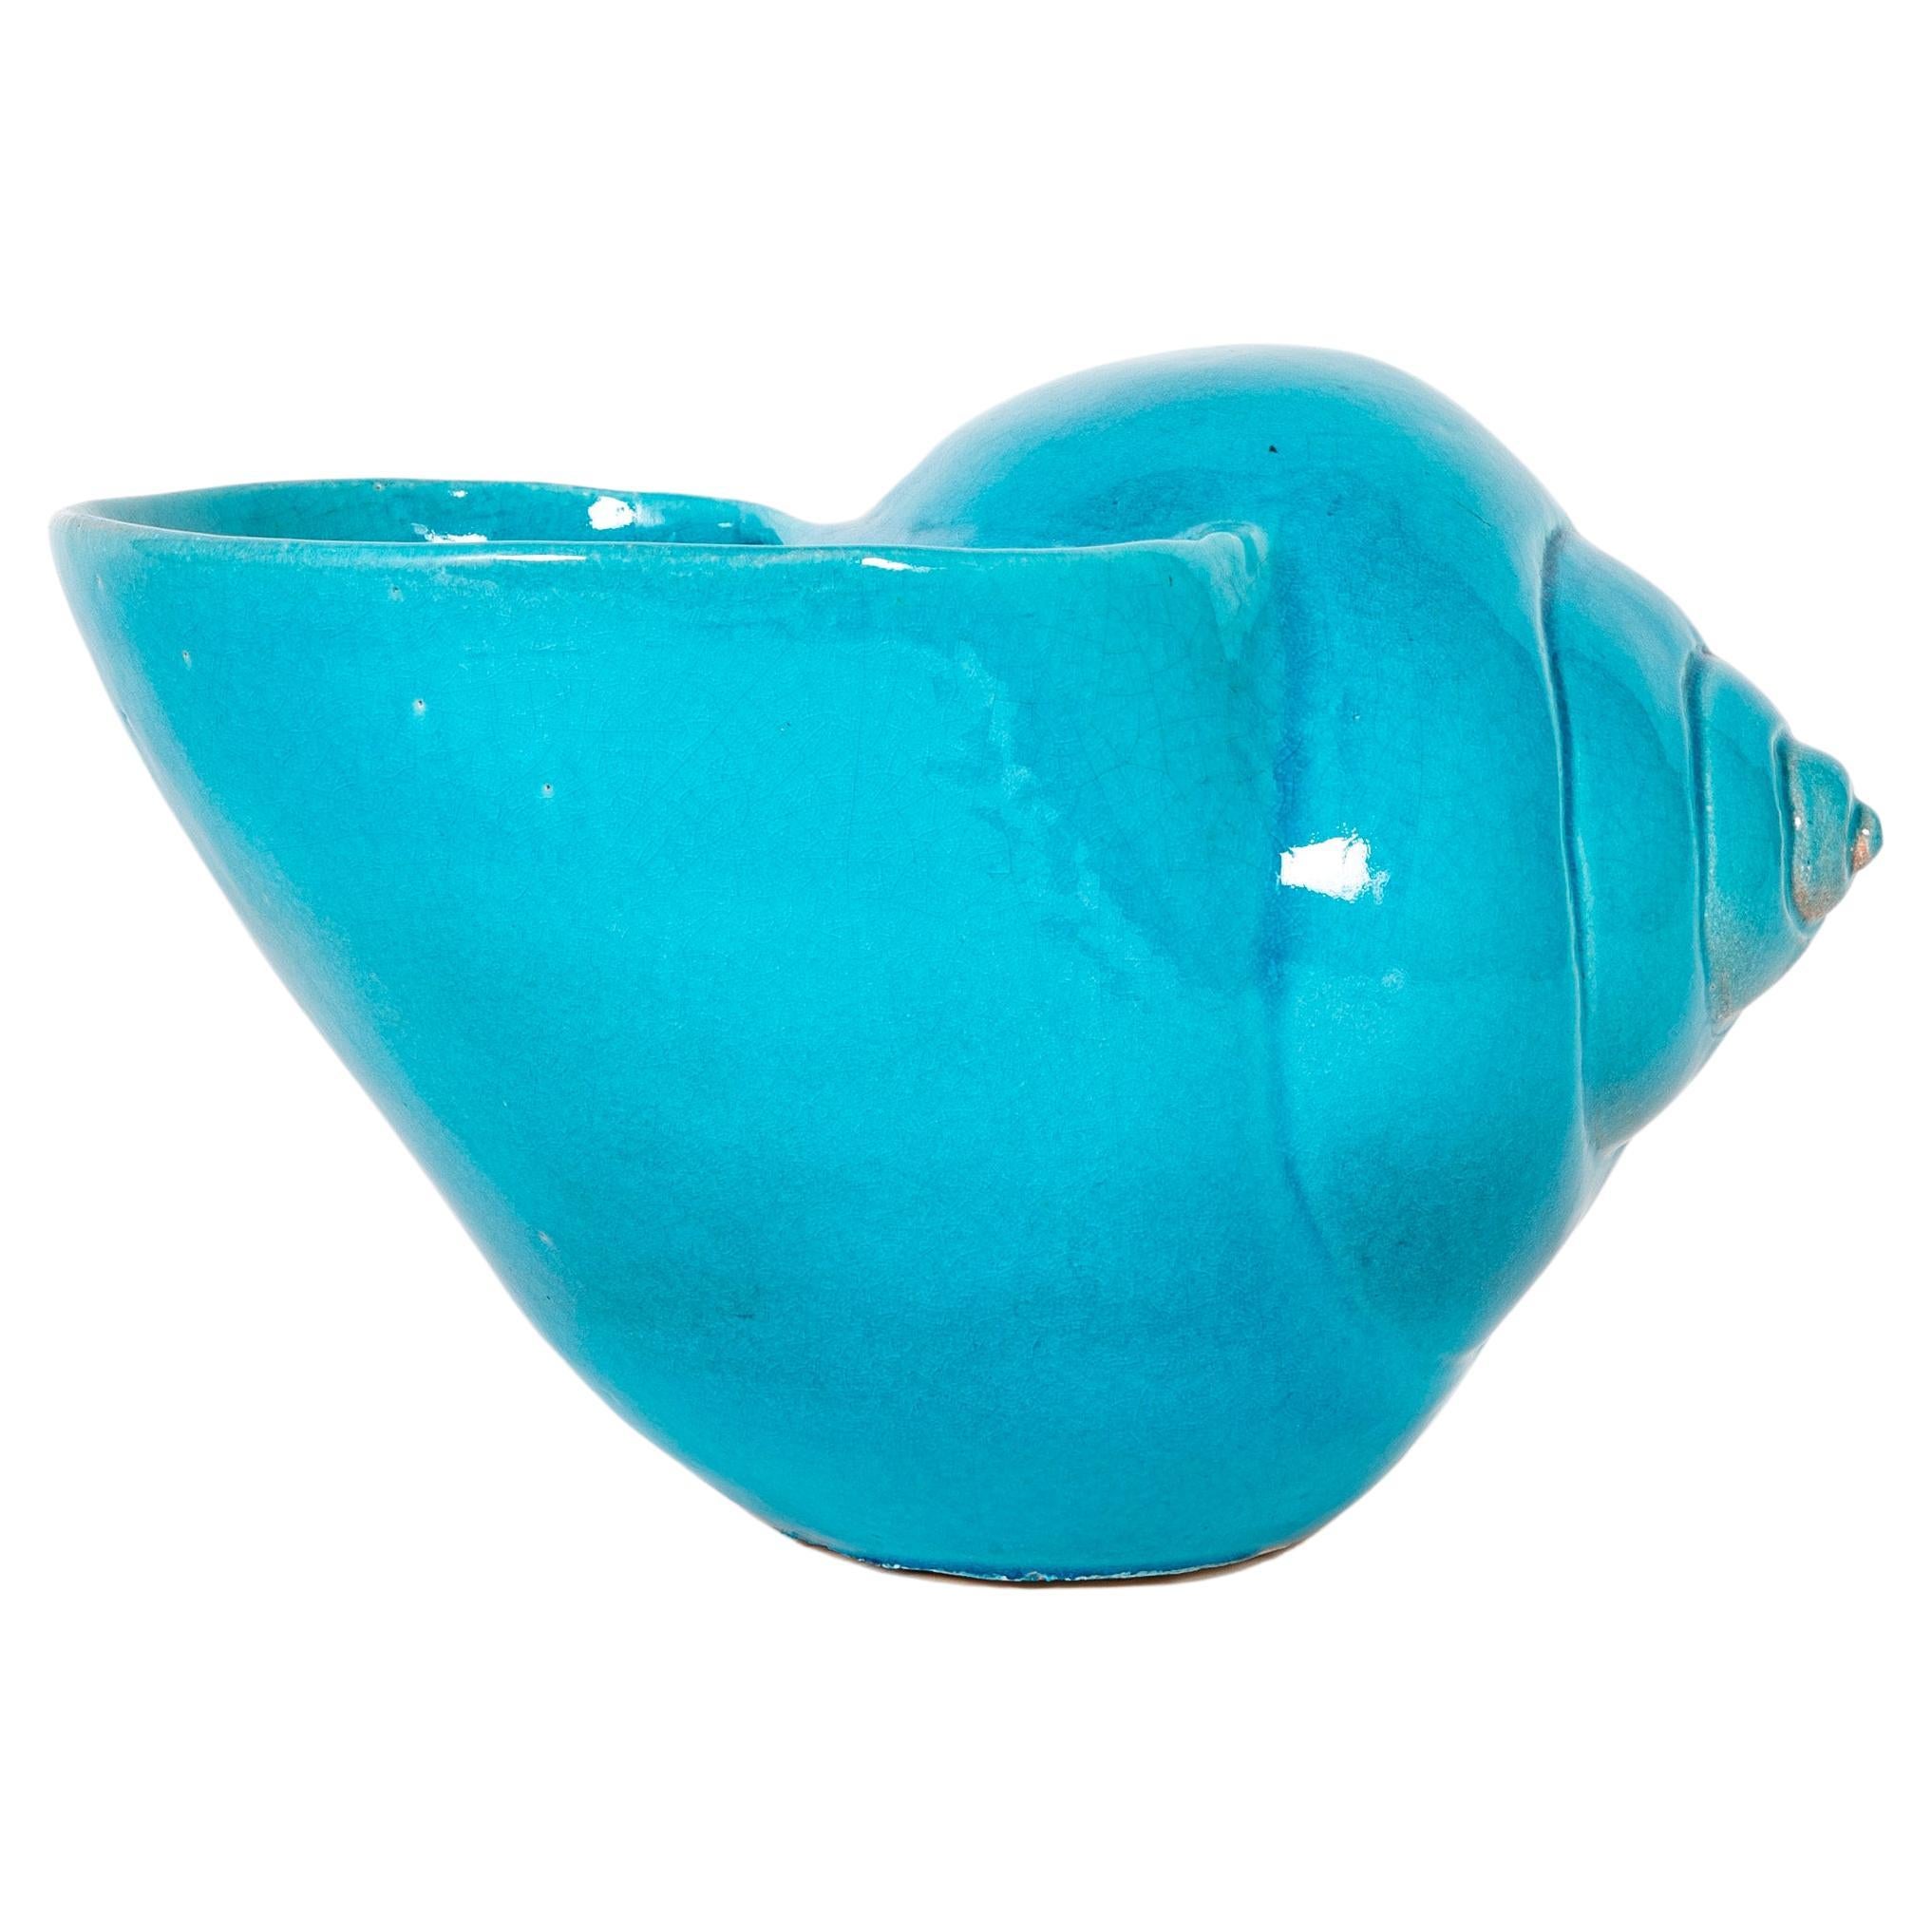 Turquoise Blue Glazed Sea Shell Vase Jardiniere Planter, Large Scale For Sale